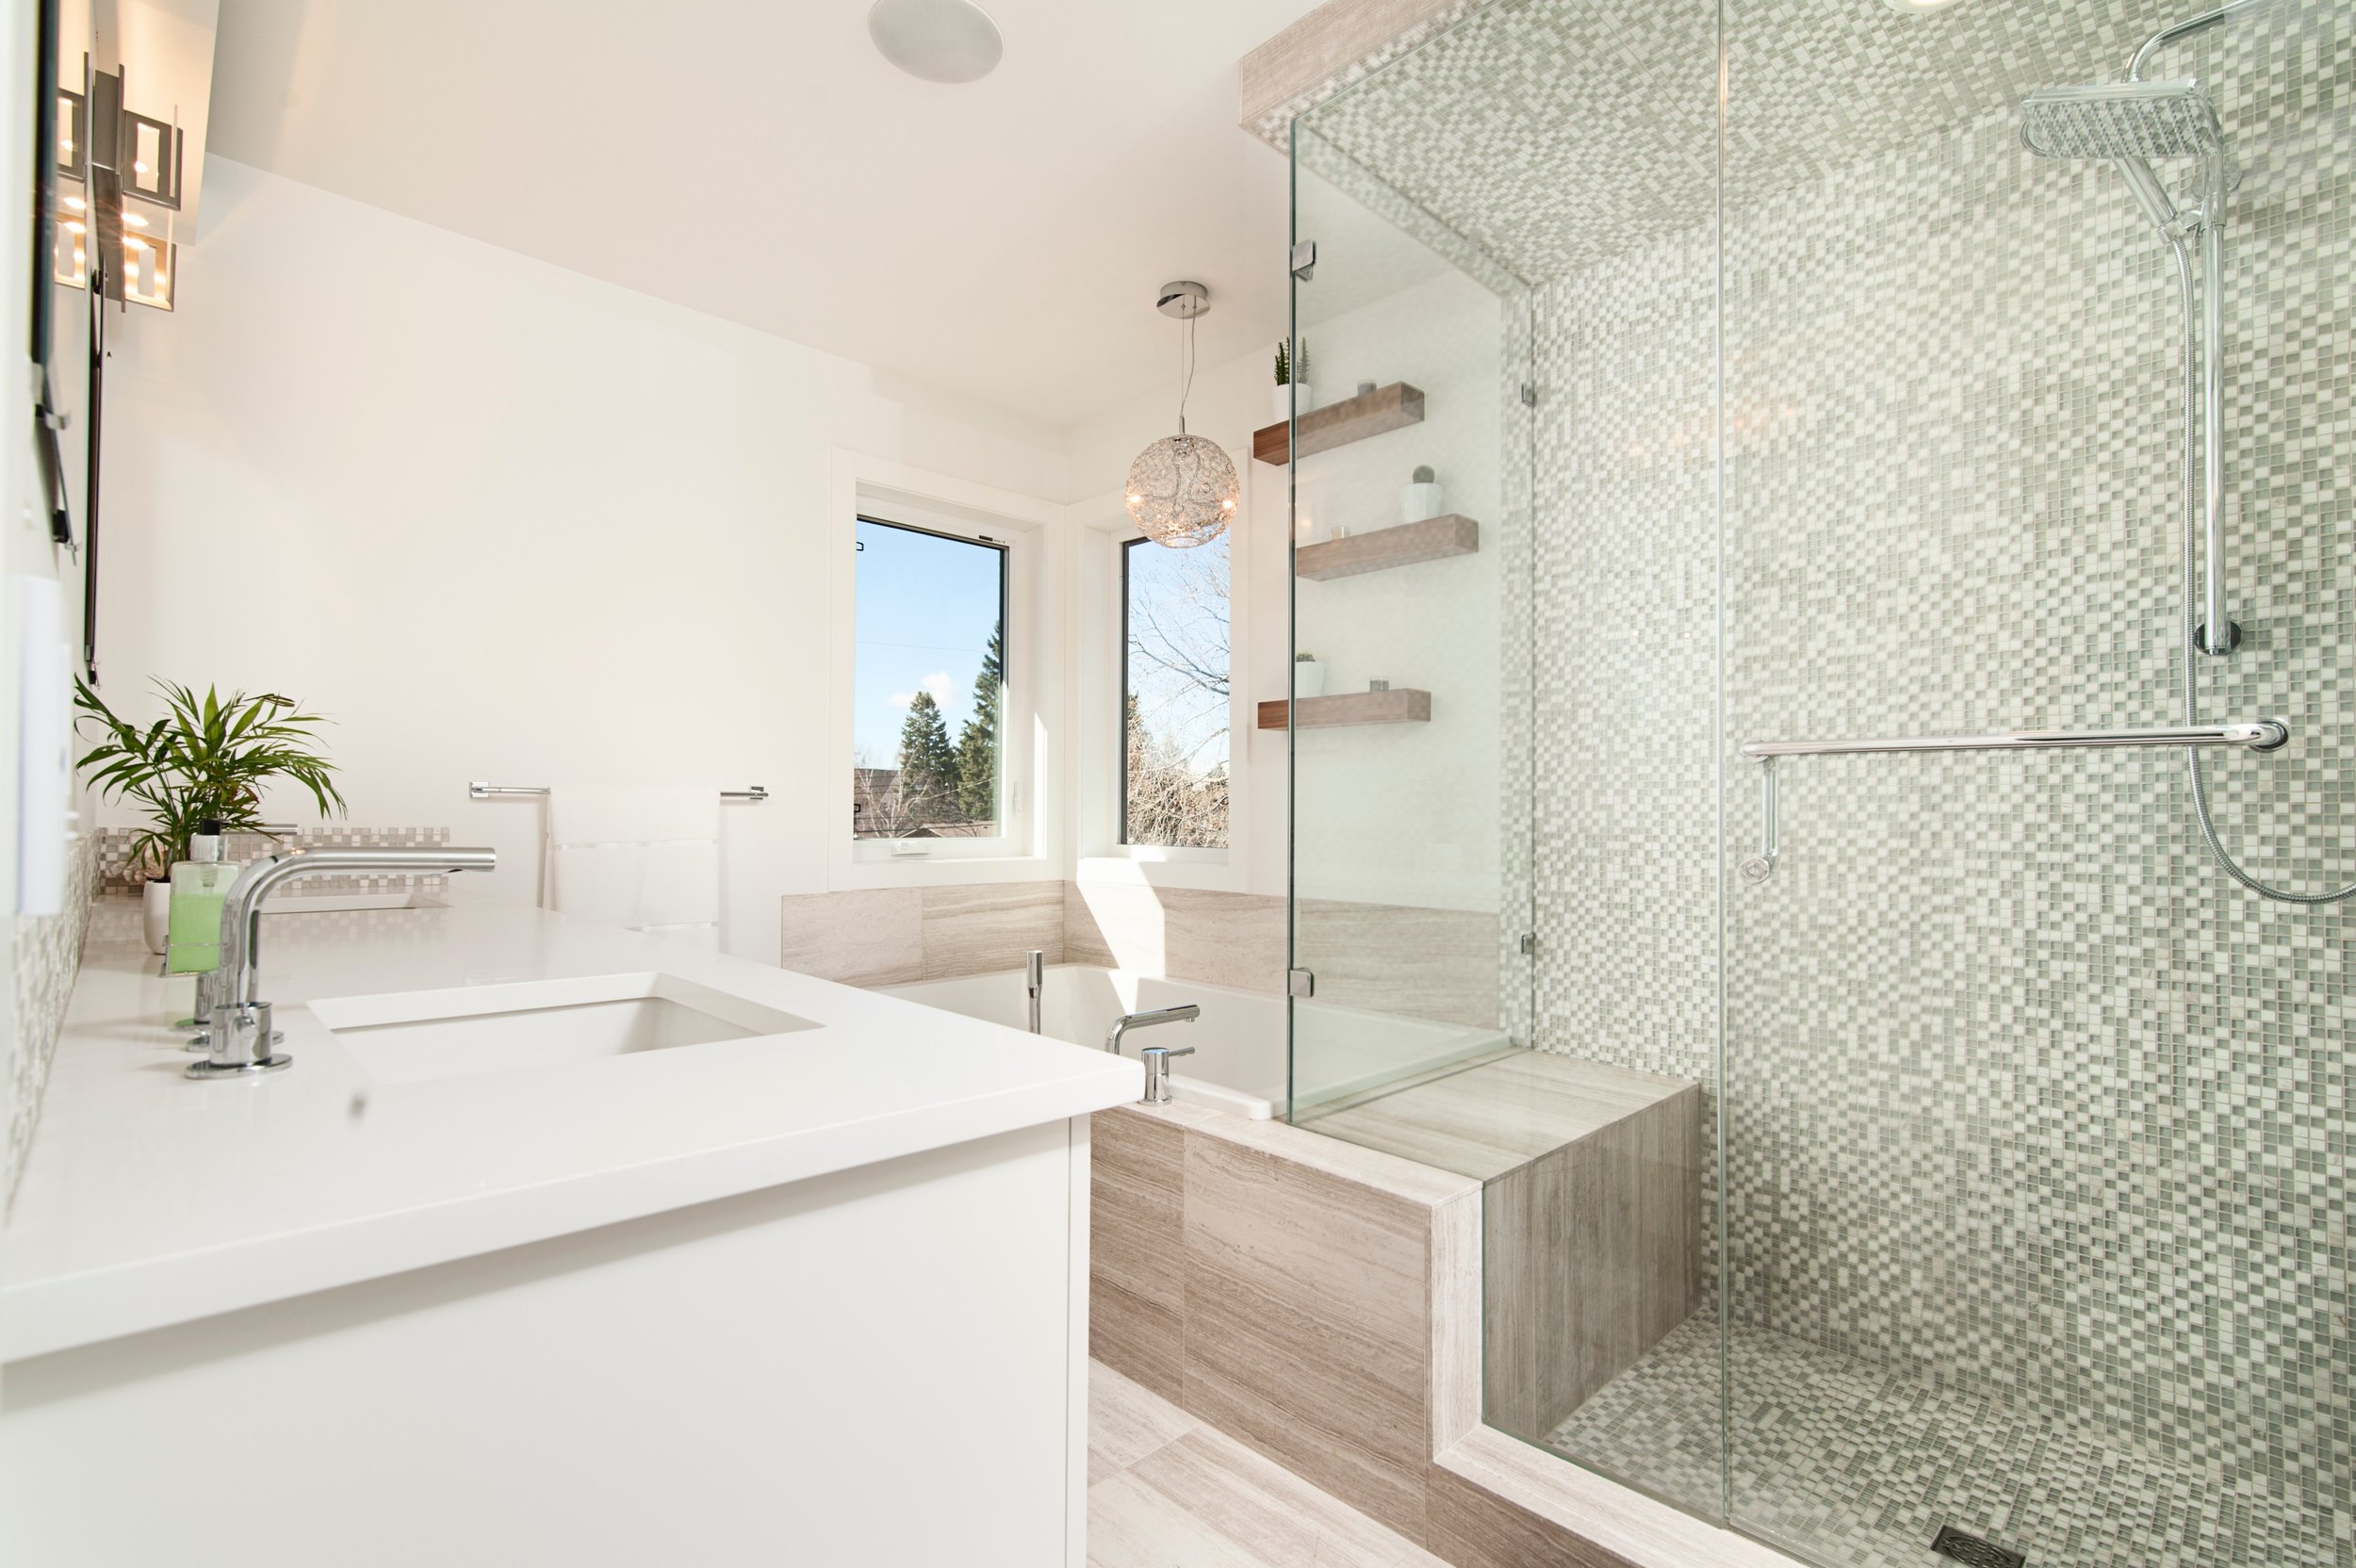 Converting Your Tub To A Walk In Shower, How To Change Bathtub Shower